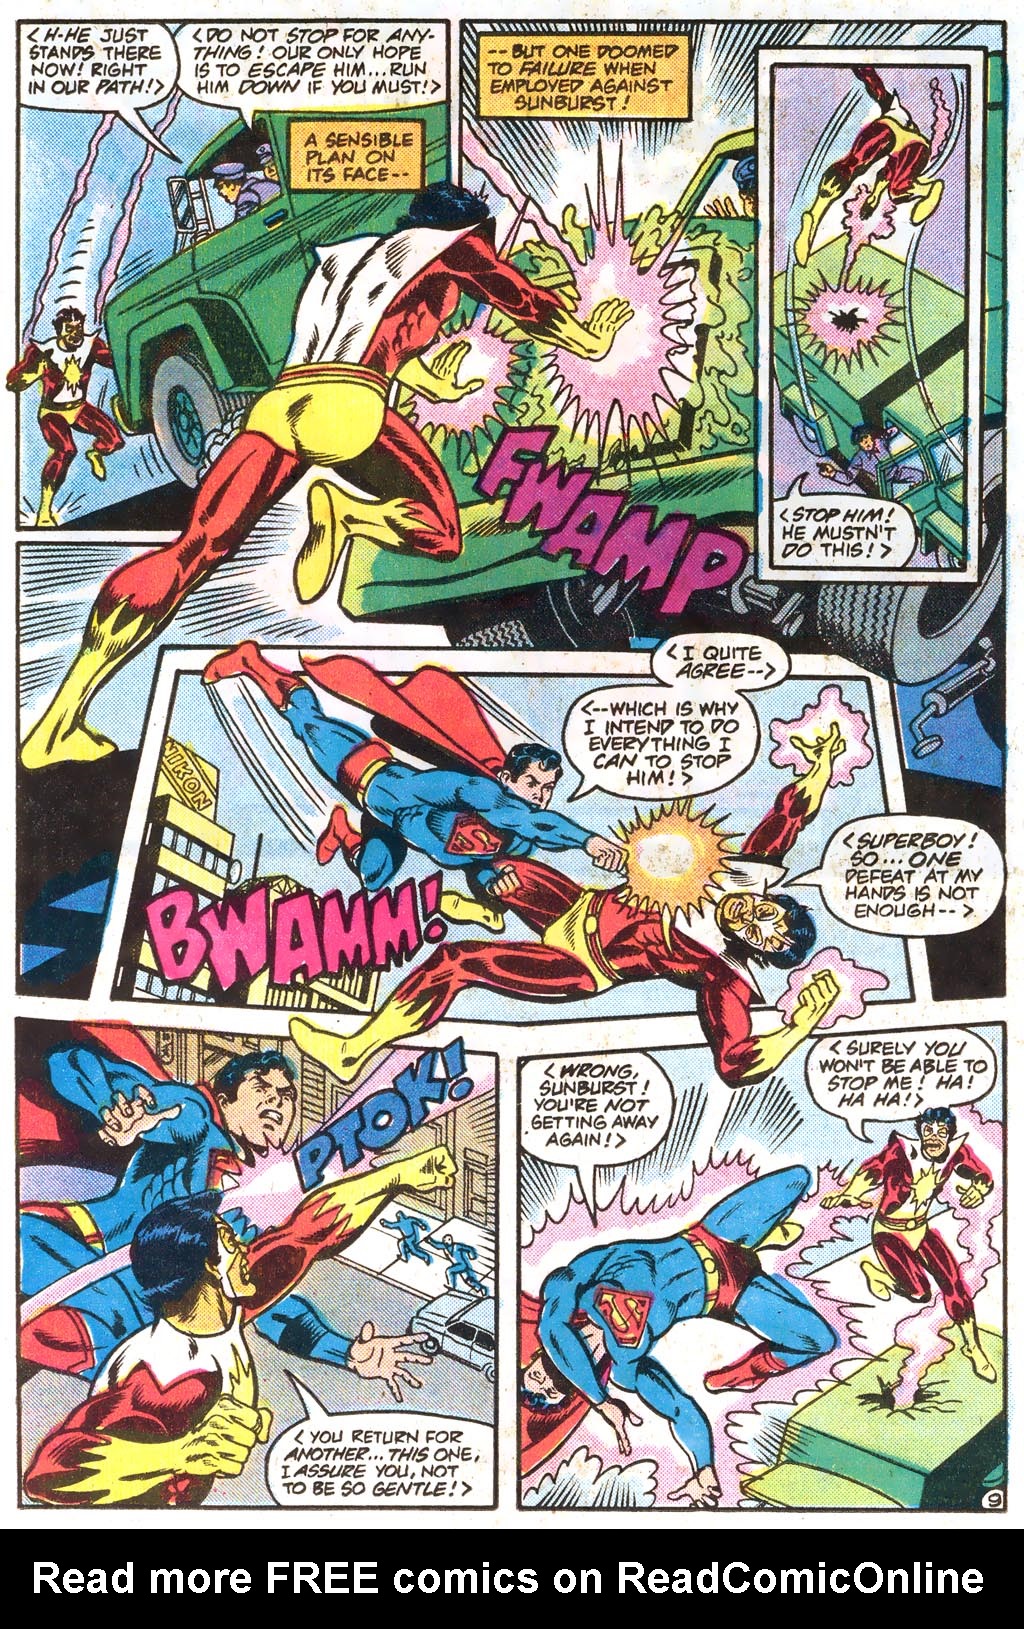 The New Adventures of Superboy 47 Page 13